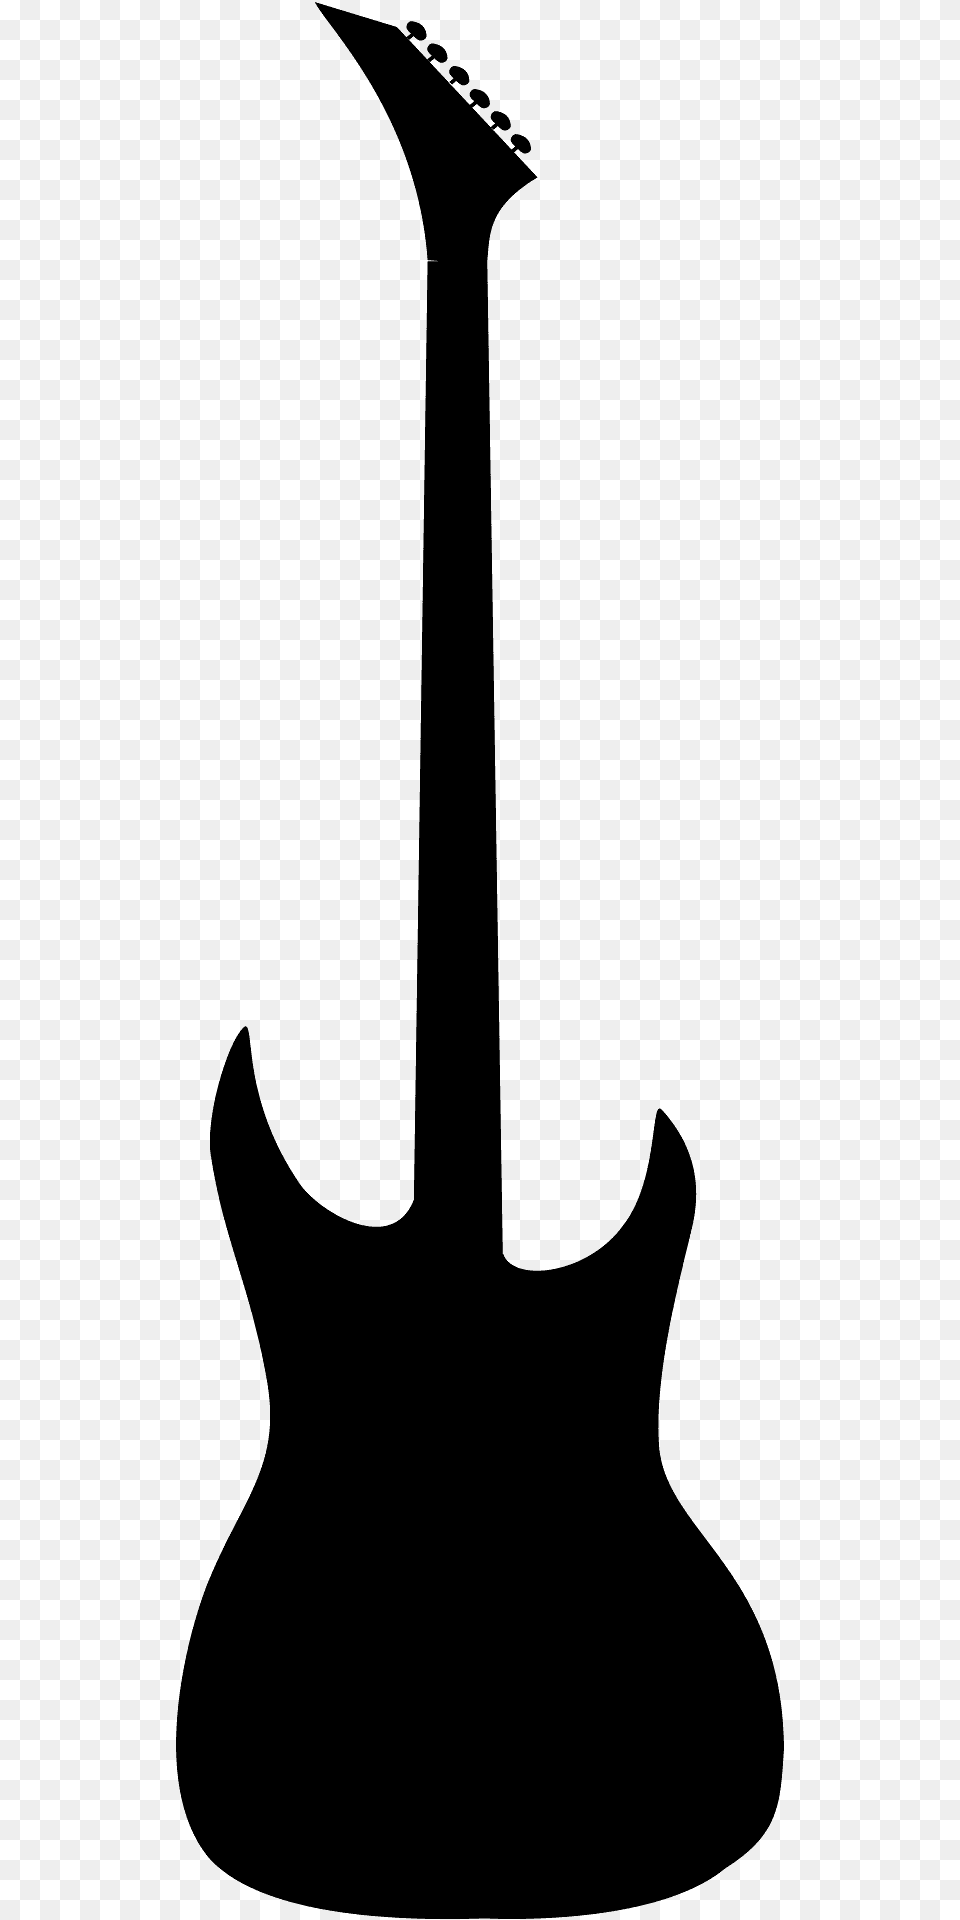 Guitar Silhouette, Musical Instrument, Bass Guitar Png Image